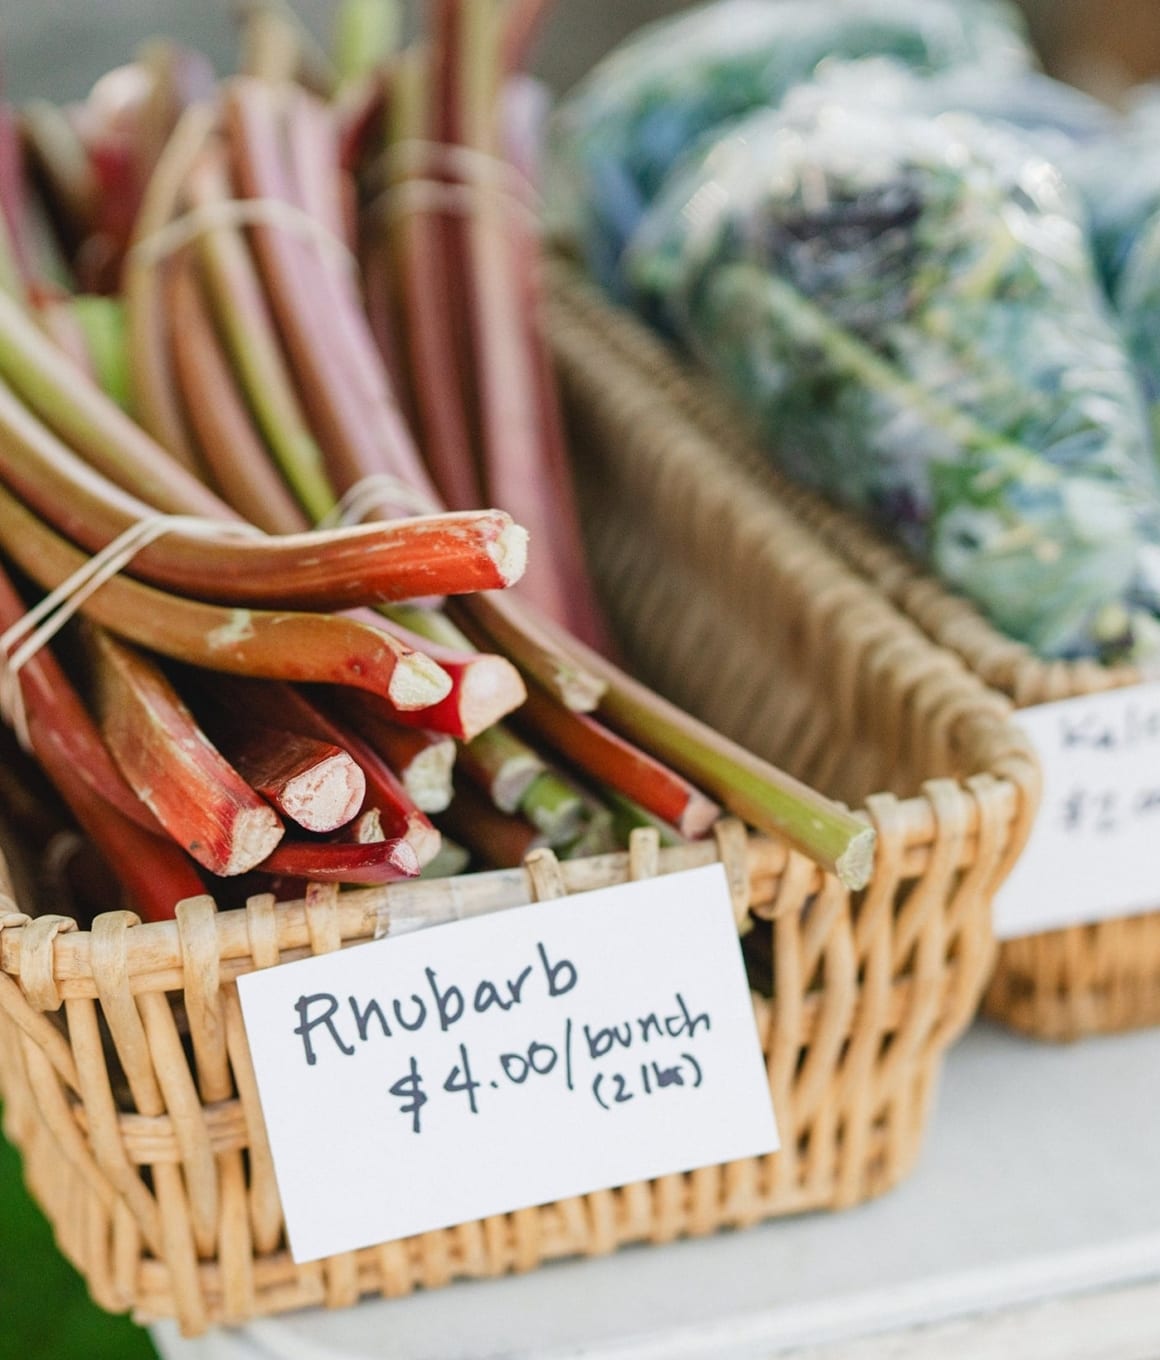 Rhubarb for sale at a local market